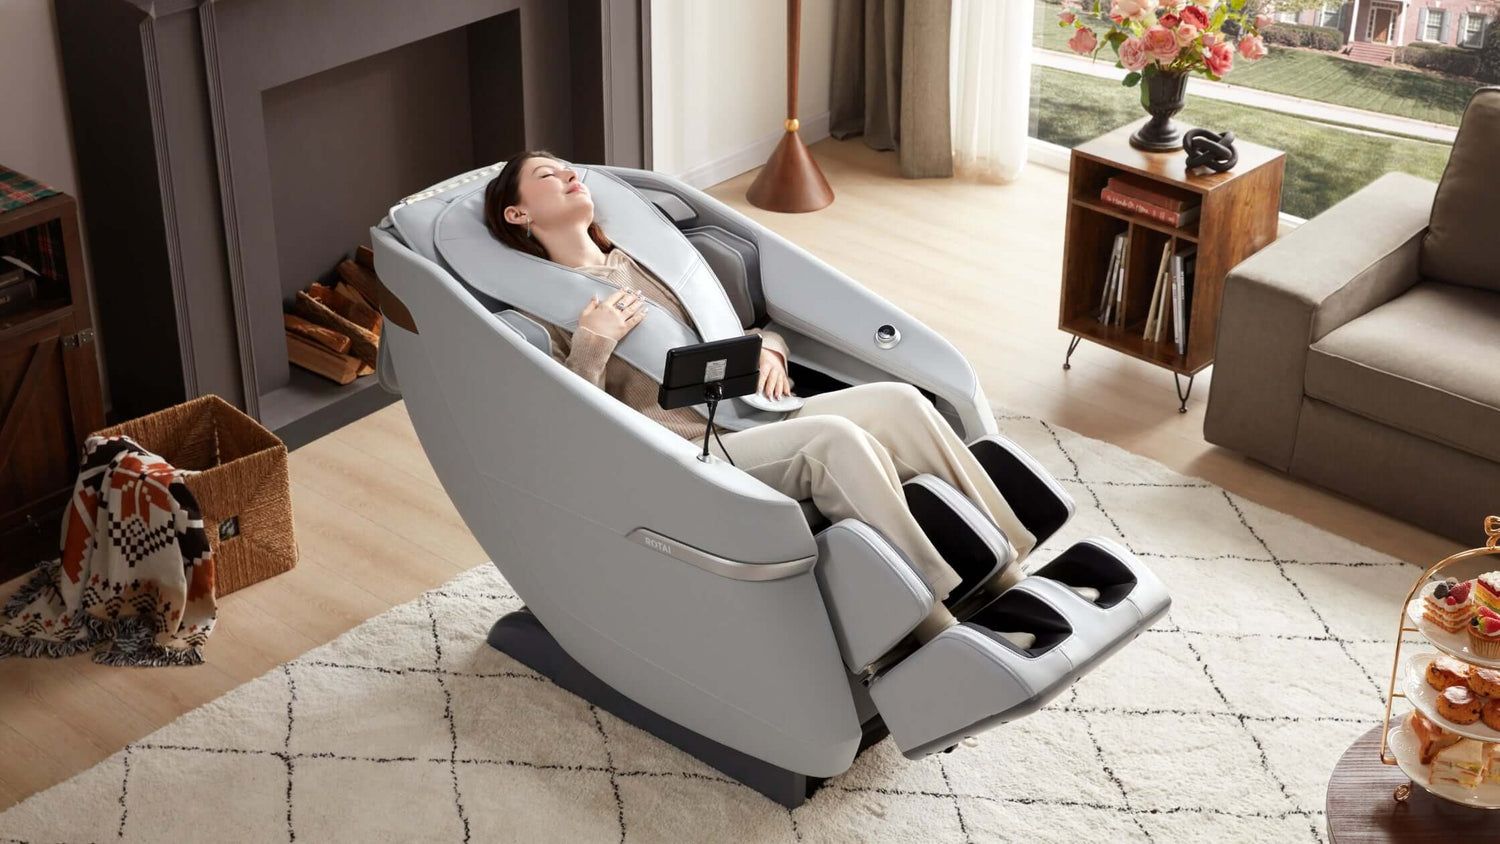 Your Guide to Choosing the Best Massage Chair in UAE, best massage chair in uae, massage chair shop, best massage chair uae, massage chair Dubai, massage chair uae, massage chair Saudi Arabia, كرسي التدليك, Best massage chair in Dubai UAE, buy massage cha